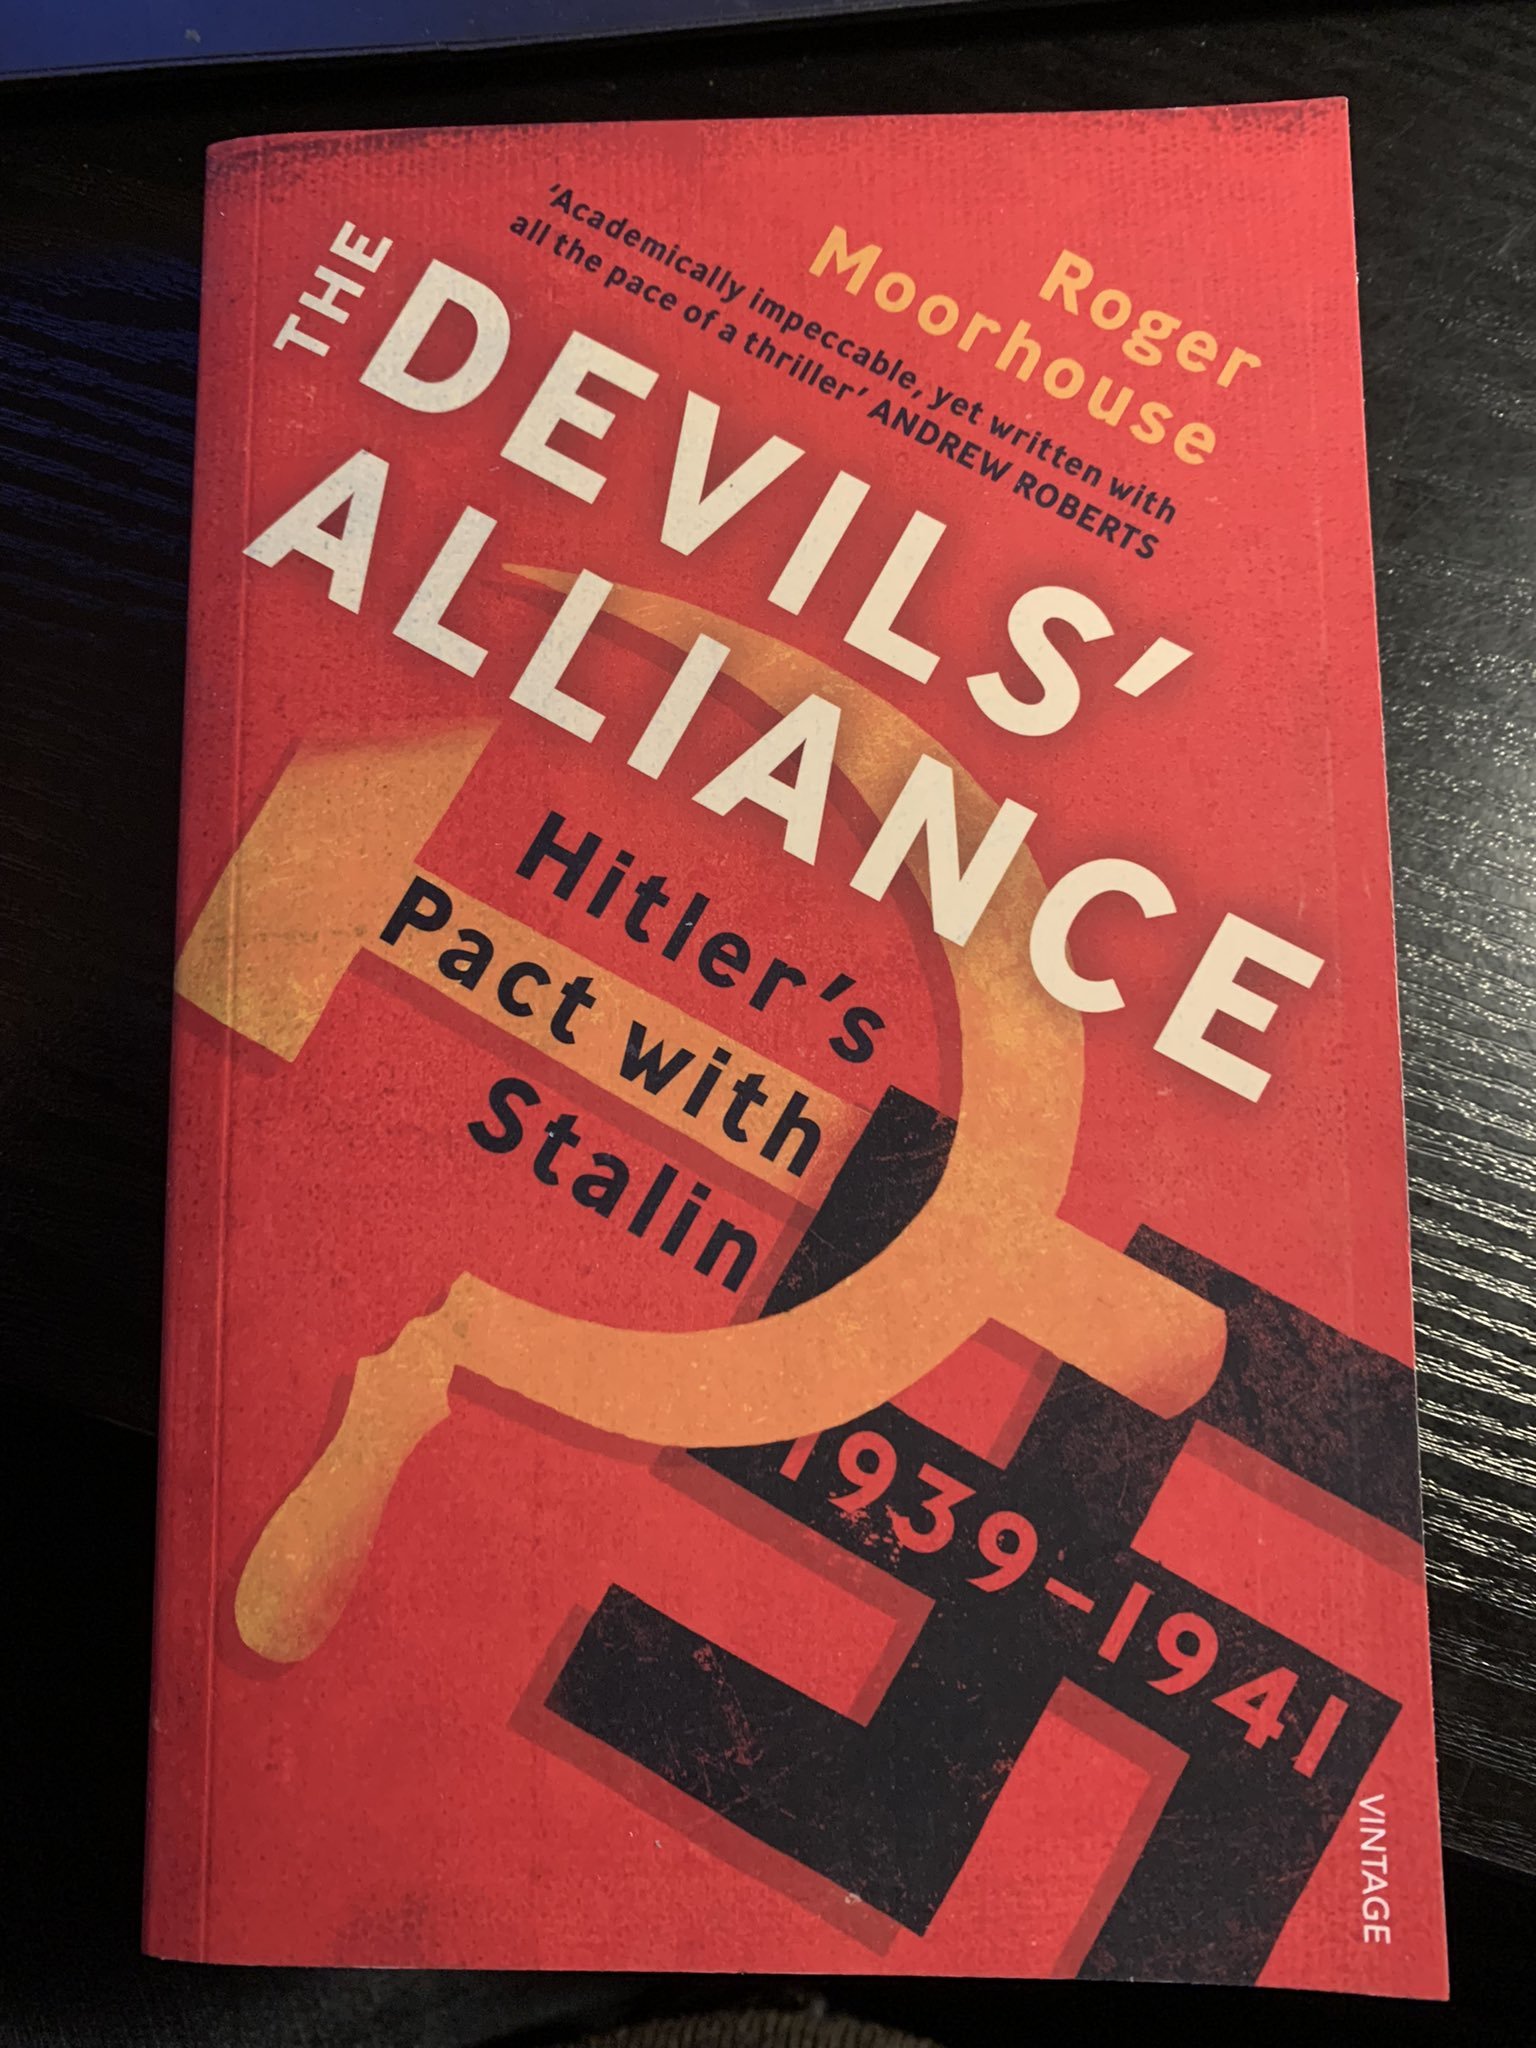 11/28/2021 – Michael Novakhov retweeted: #HistoryWritersDay – my 2014 offering “The Devils’ Alliance” – my history of the #Nazi-#Soviet Pact and the forgotten German-Soviet relationship … “meticulous and vividly readable” and “a marvellous achievement”. shar.es/aWxU0Y